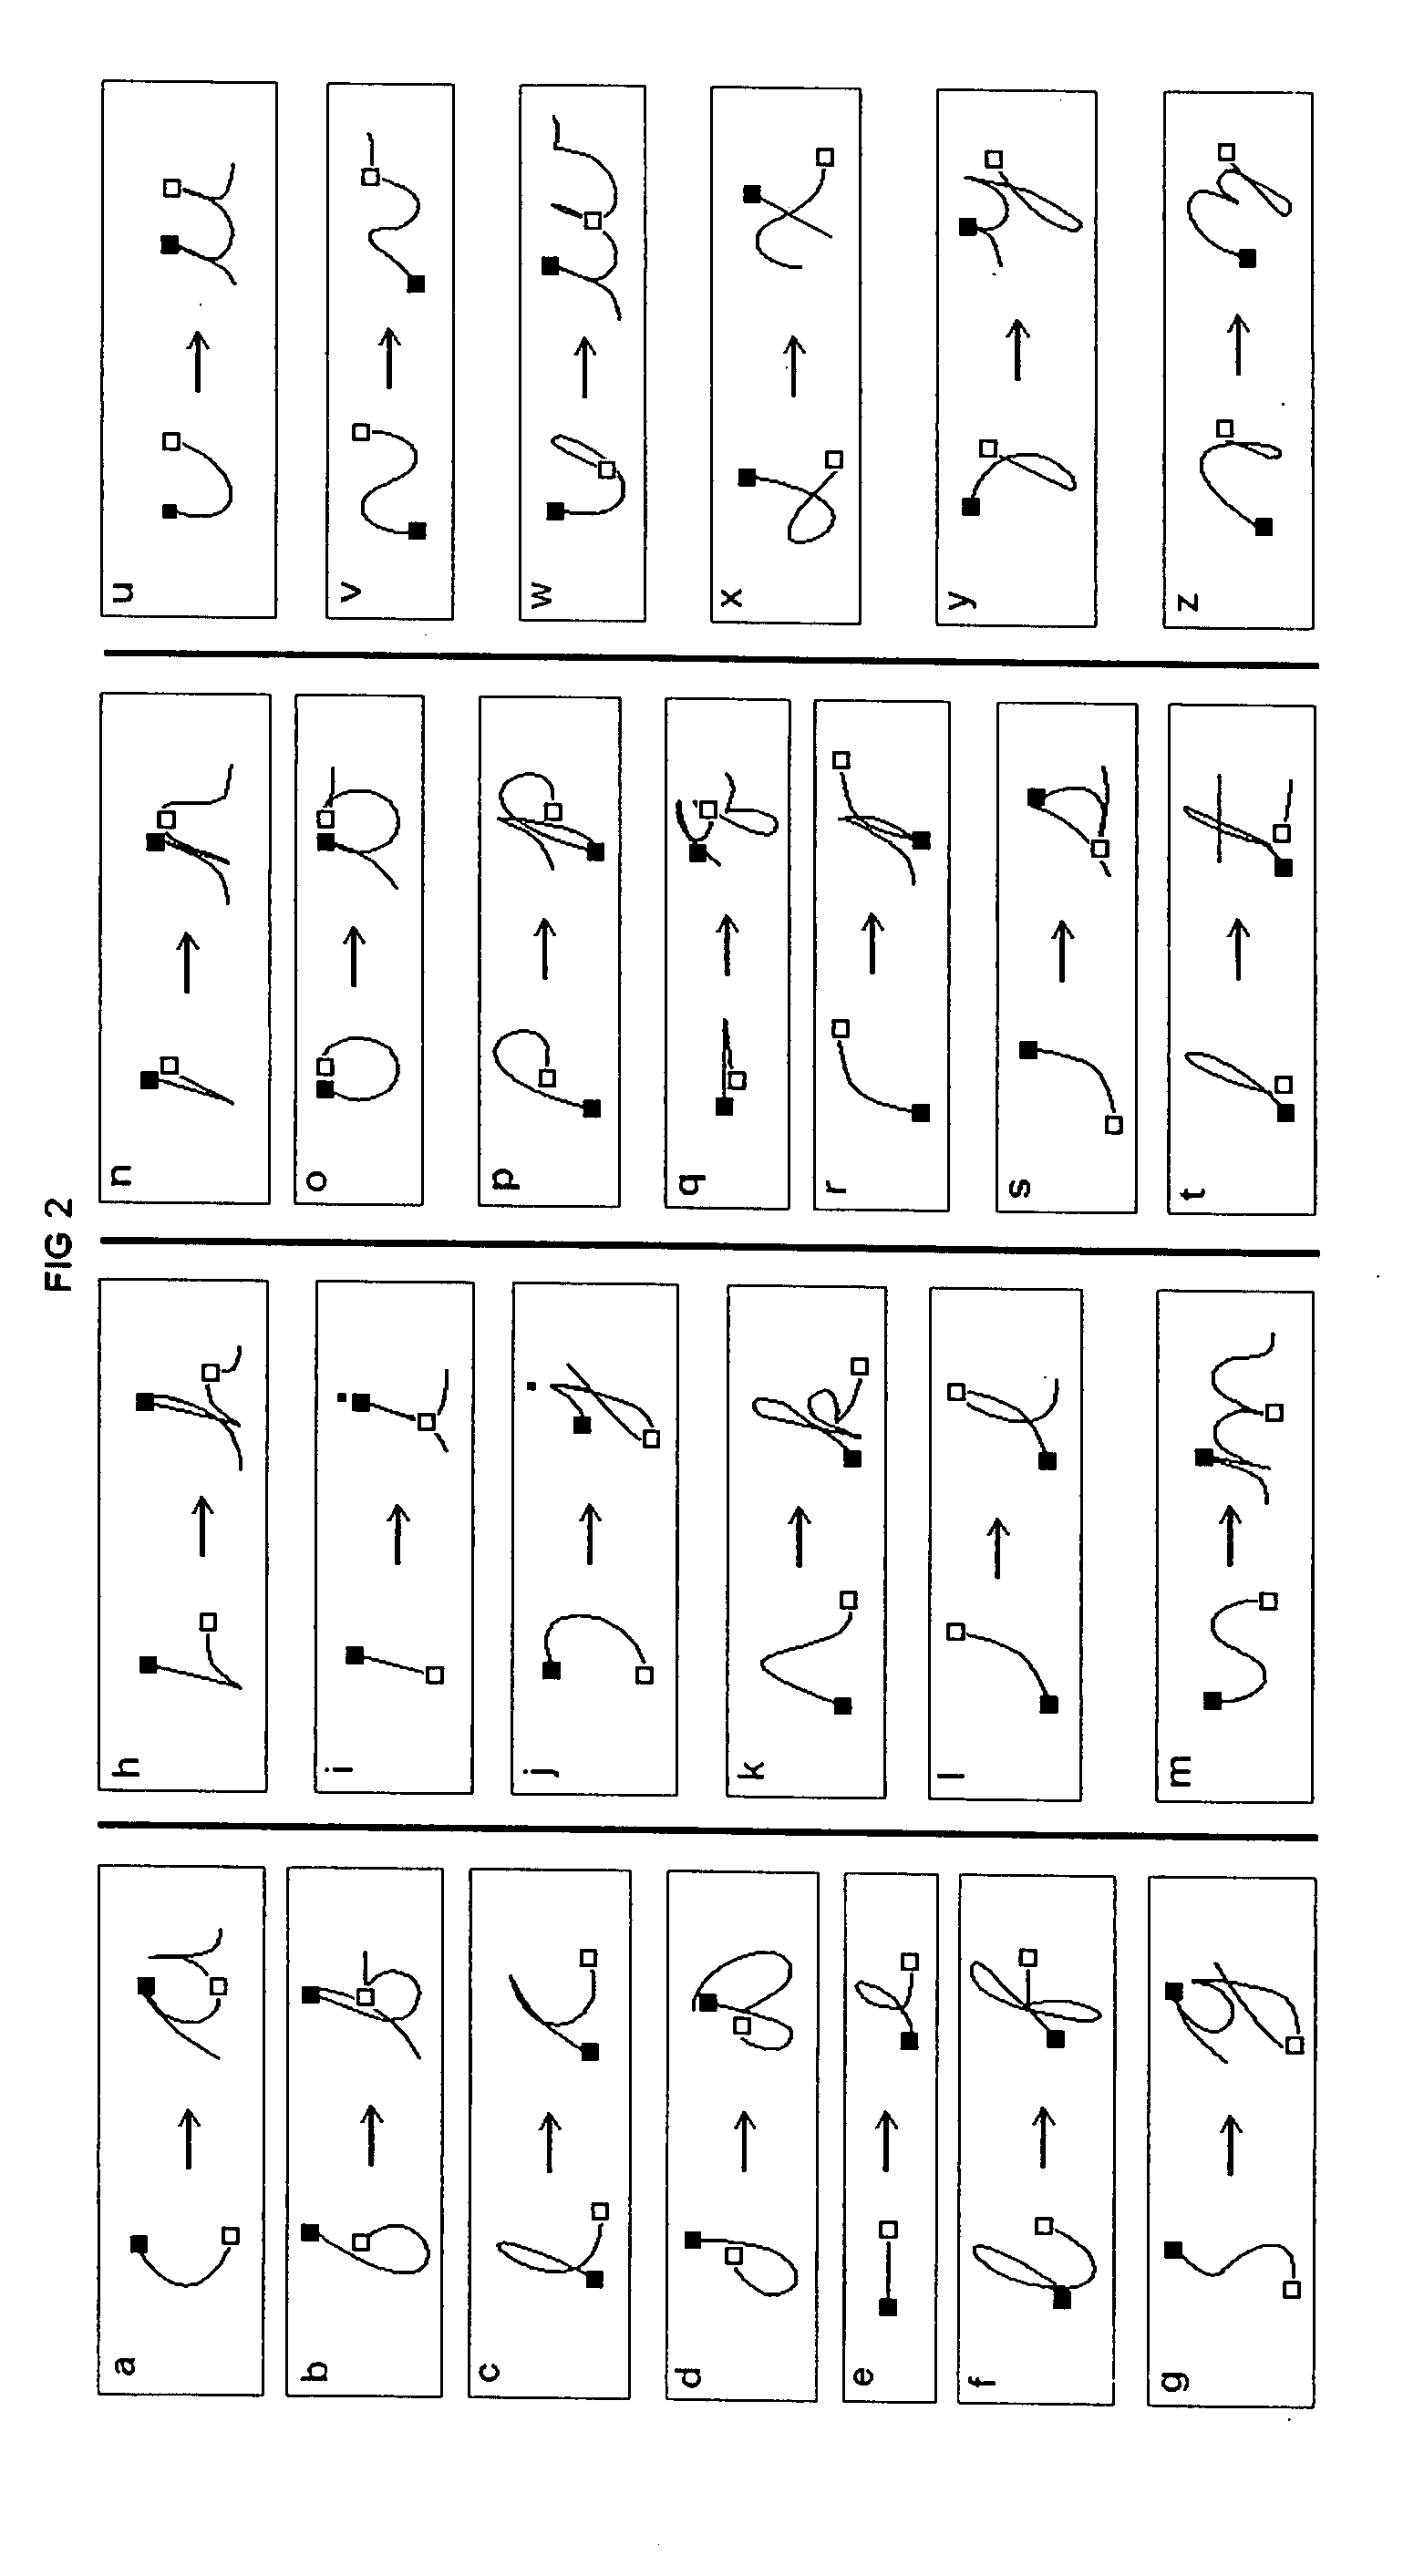 Handwriting recognition system and methodology for use with a latin derived alphabet universal computer script